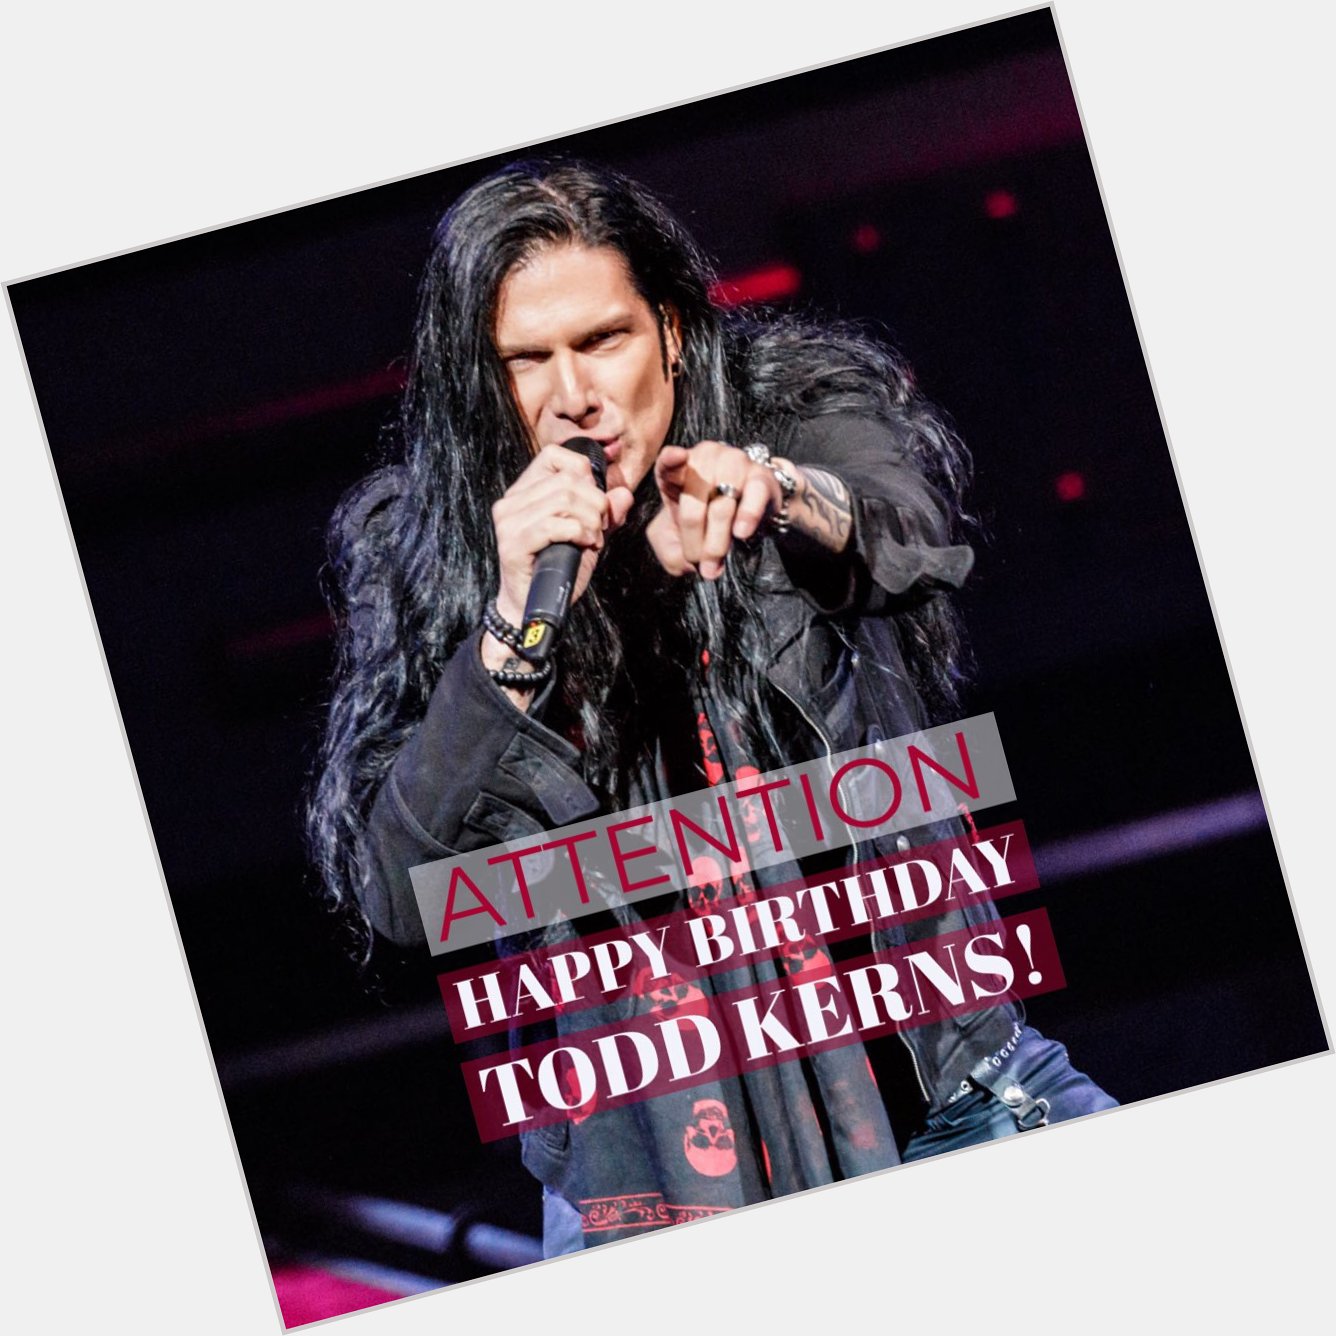 A very happy birthday to Todd Kerns! (Heads up that Todd will join us for a few shows over the holidays) 